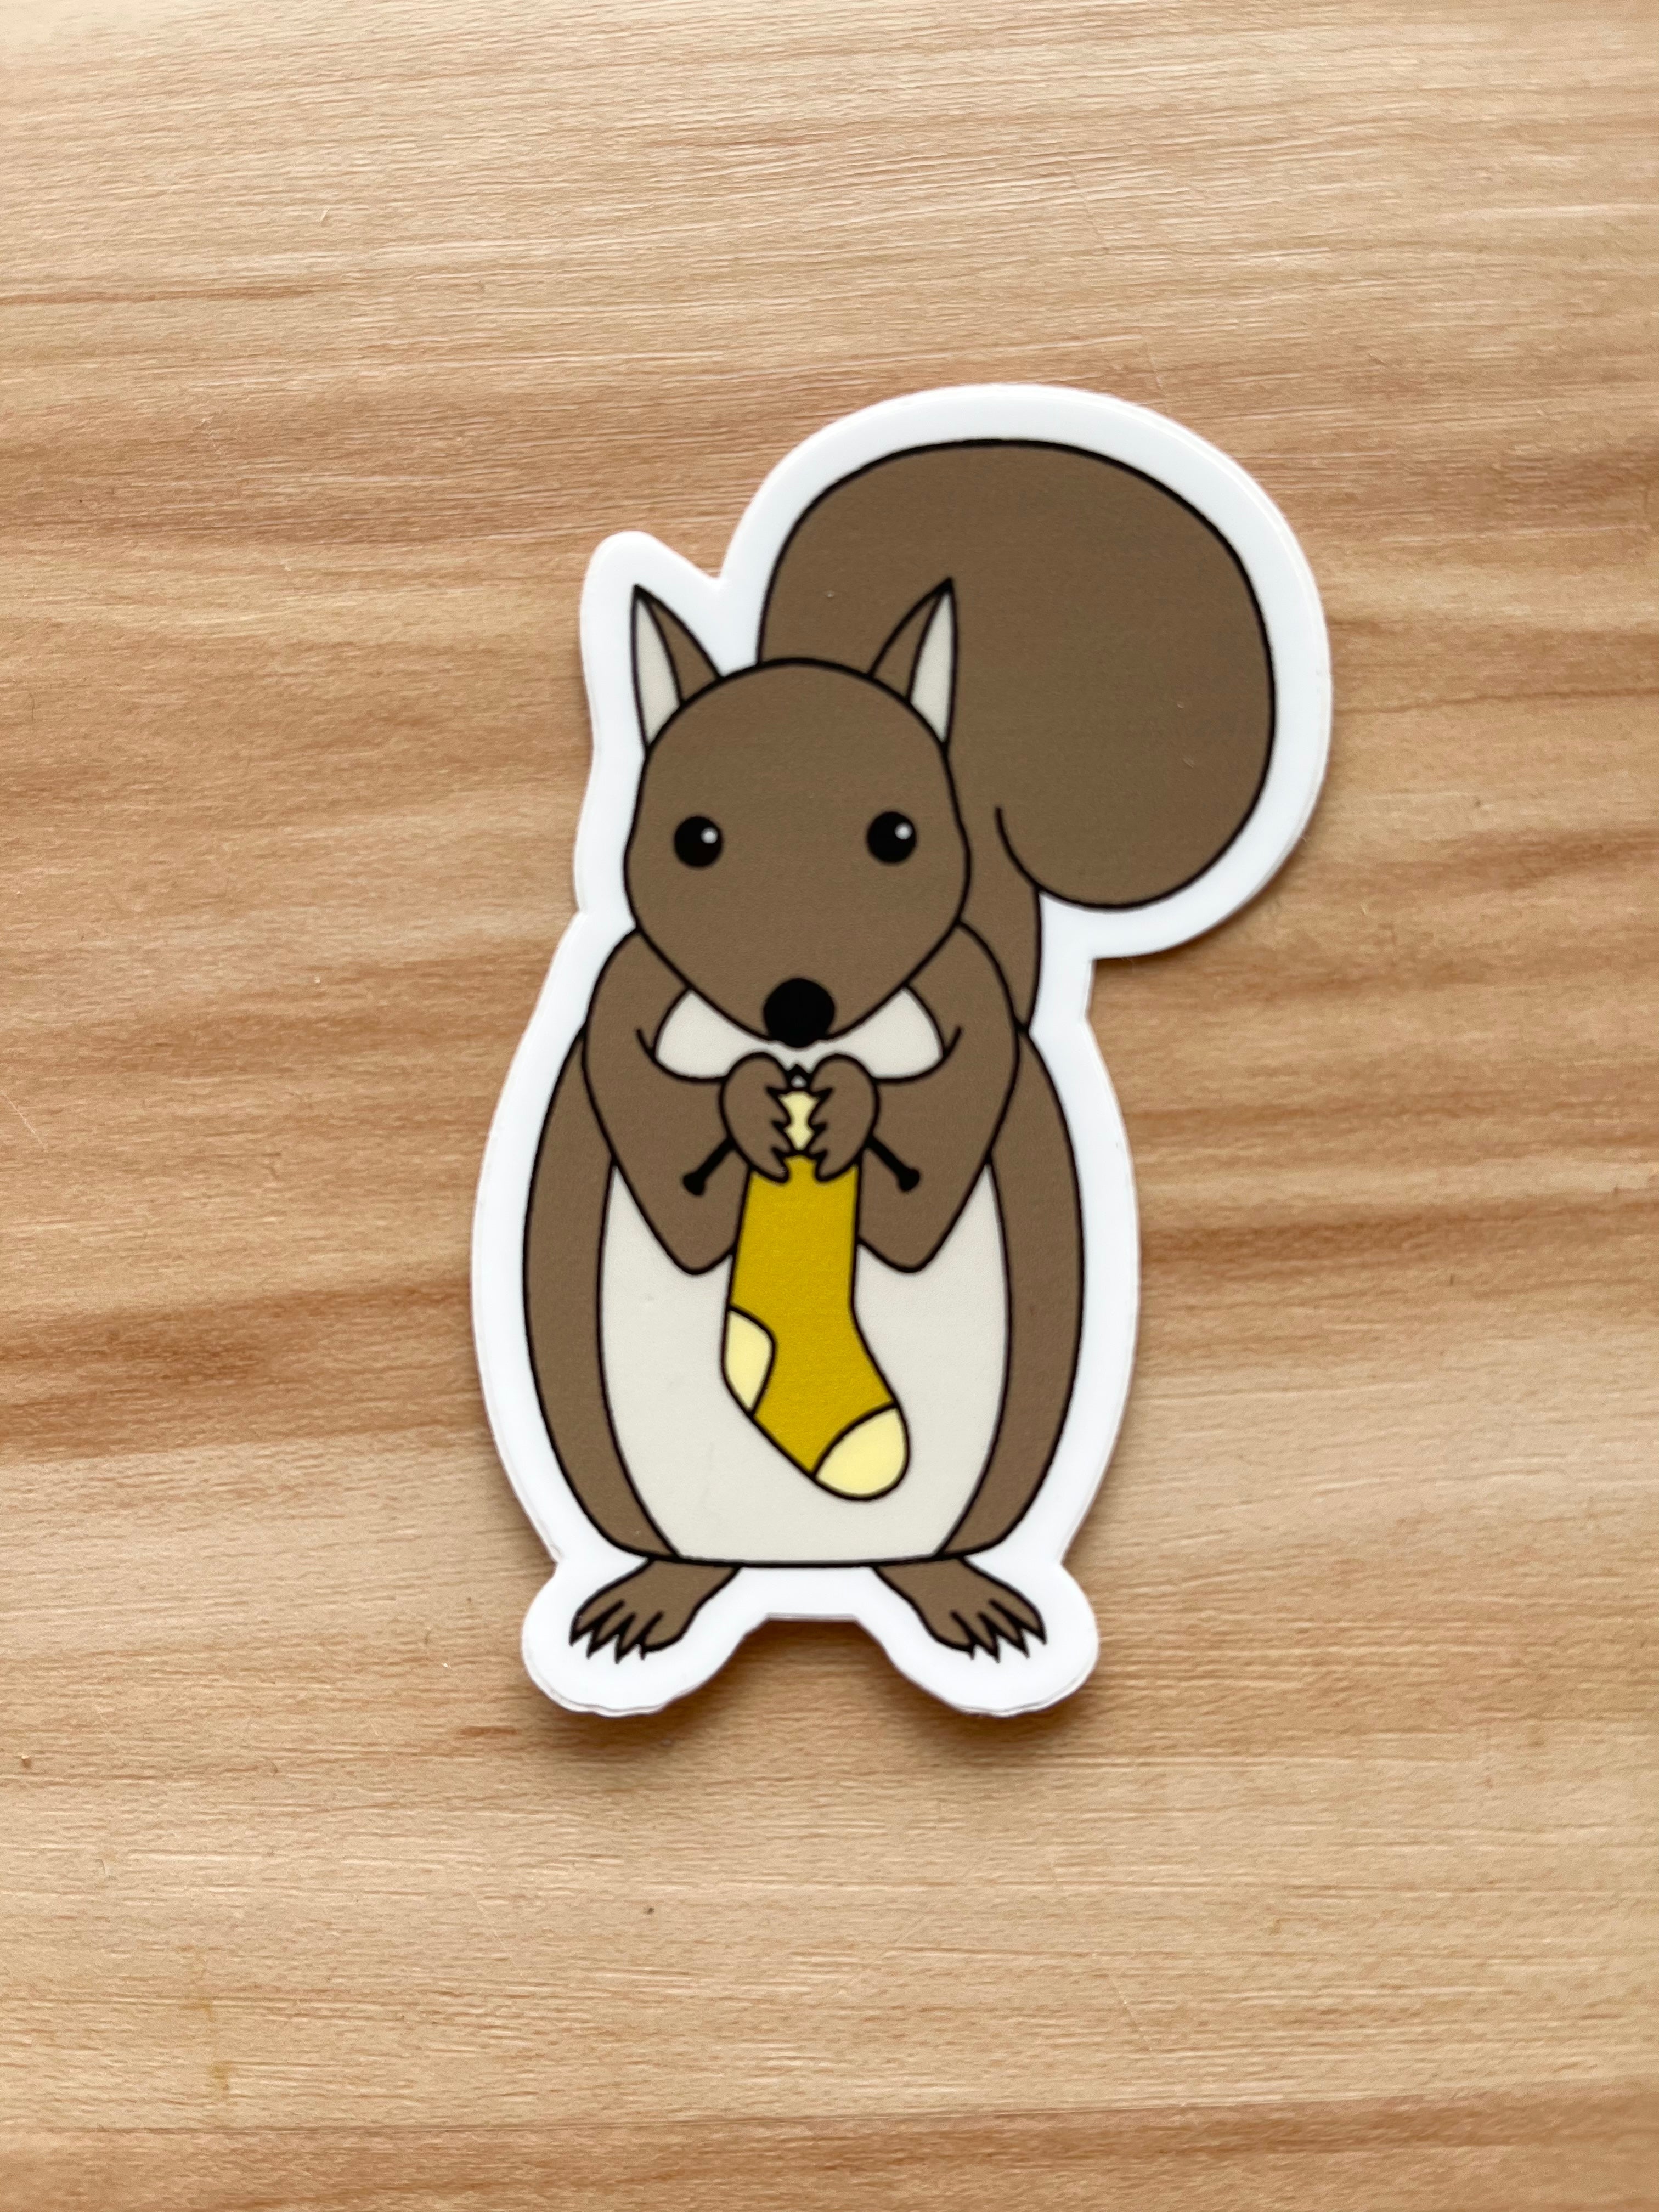 Squirrel Knitting - Knitting Themed Stickers